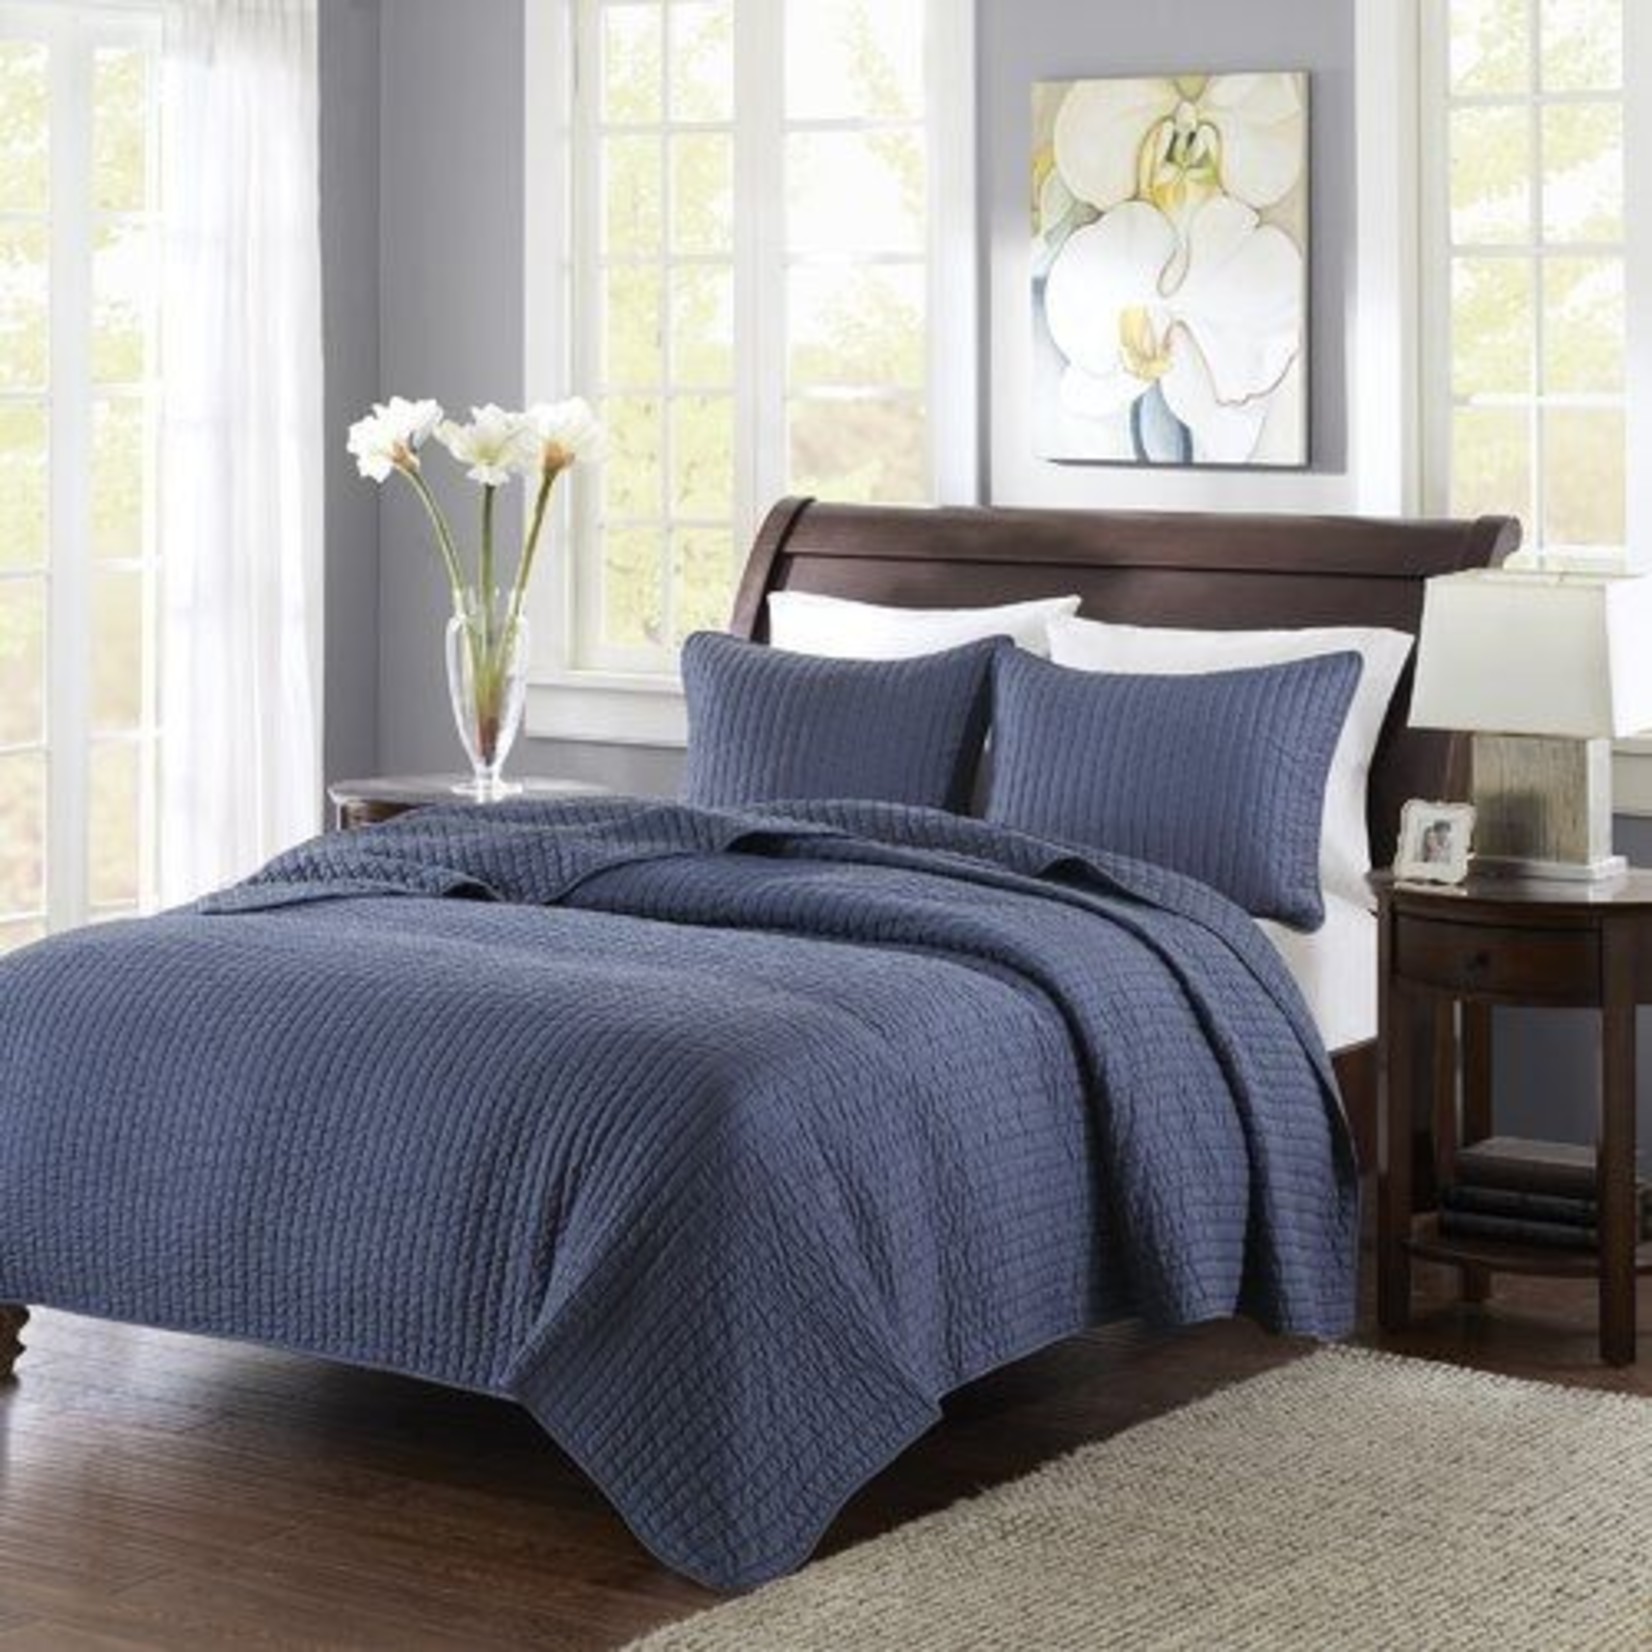 Channel Navy Queen Quilt and Shams